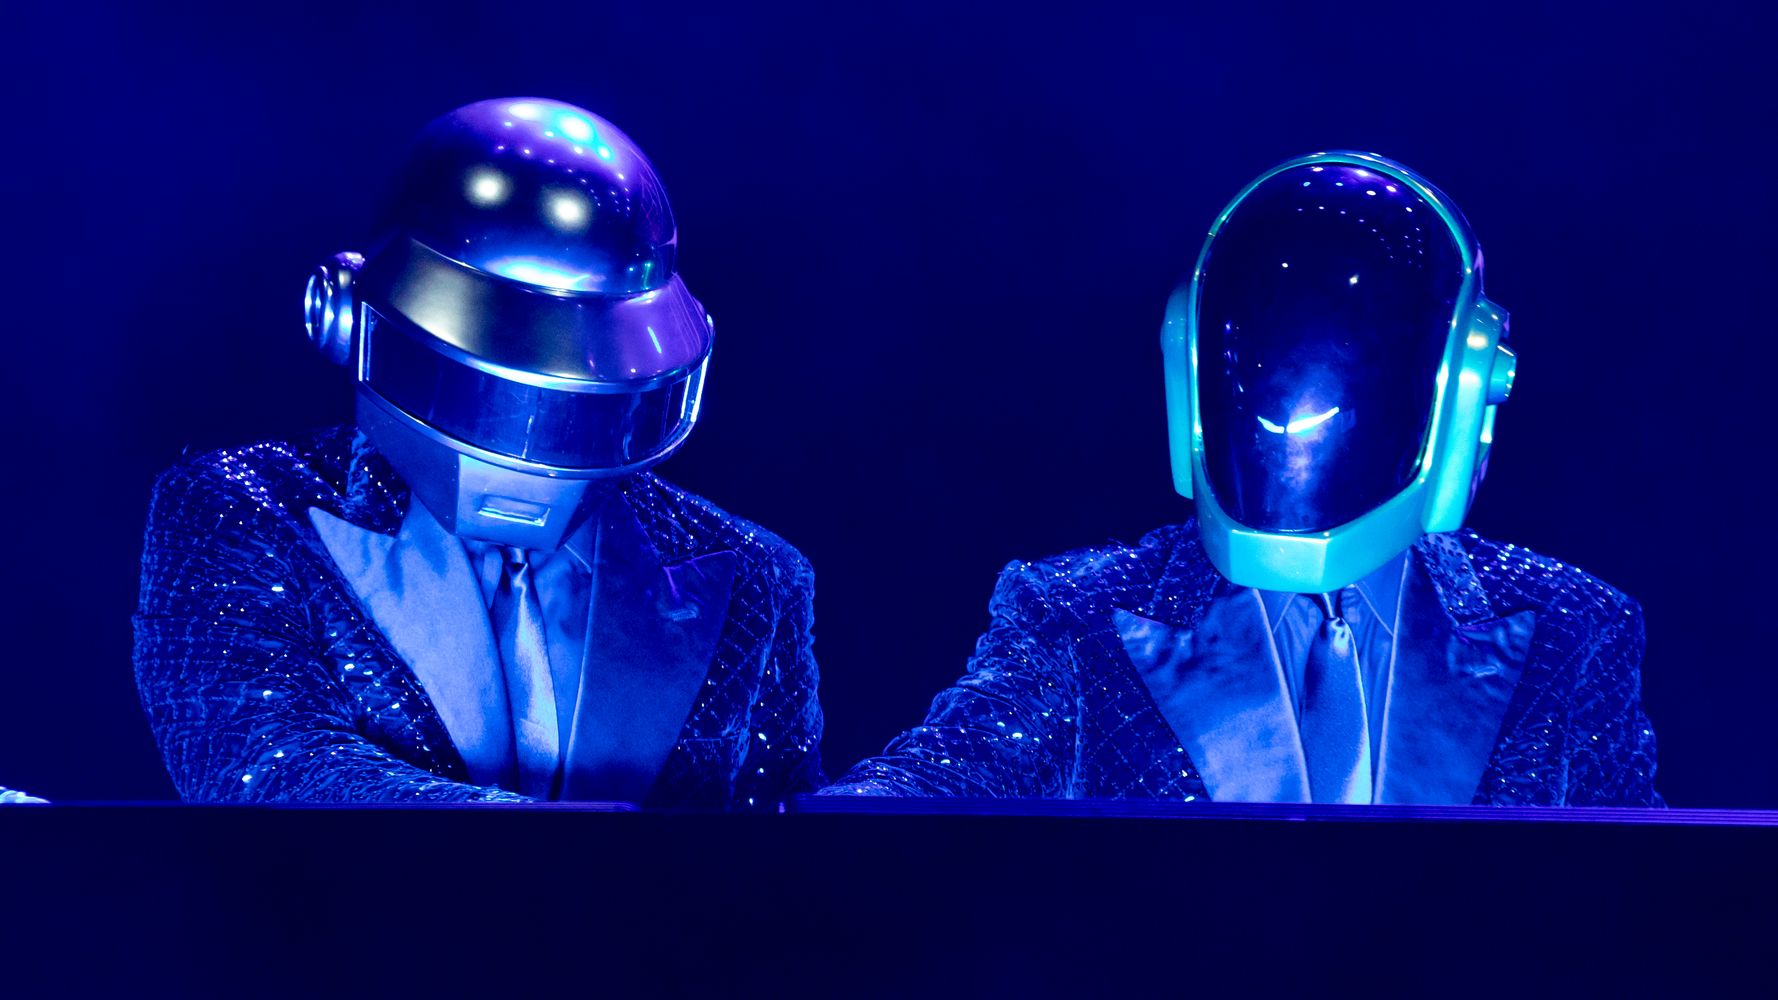 Daft Punk Announces Breakup After 28 Years - The New York Times